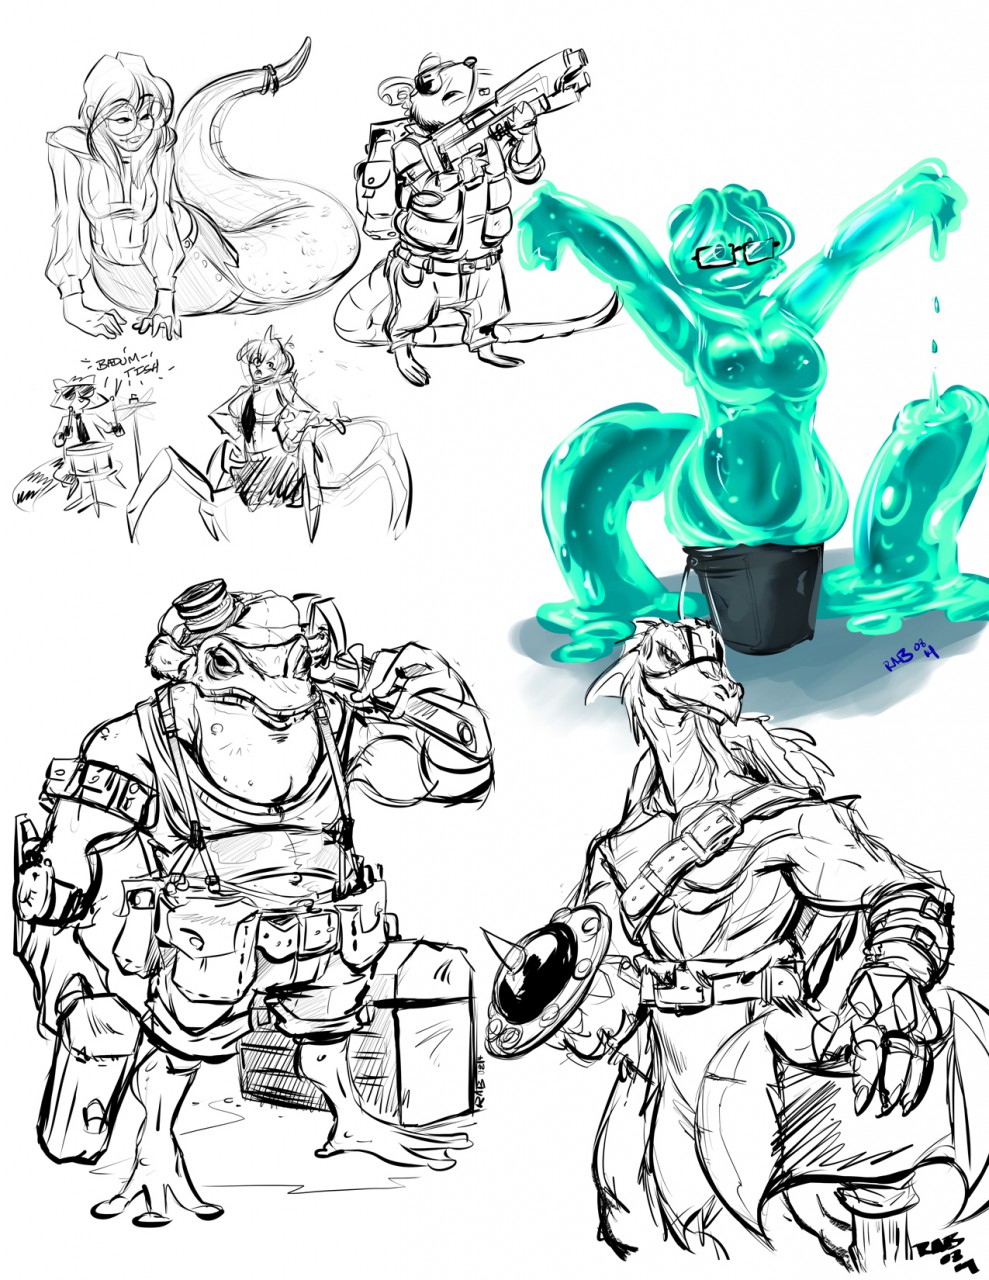 Sketches from stuff by CommanderRab -- Fur Affinity [dot] net